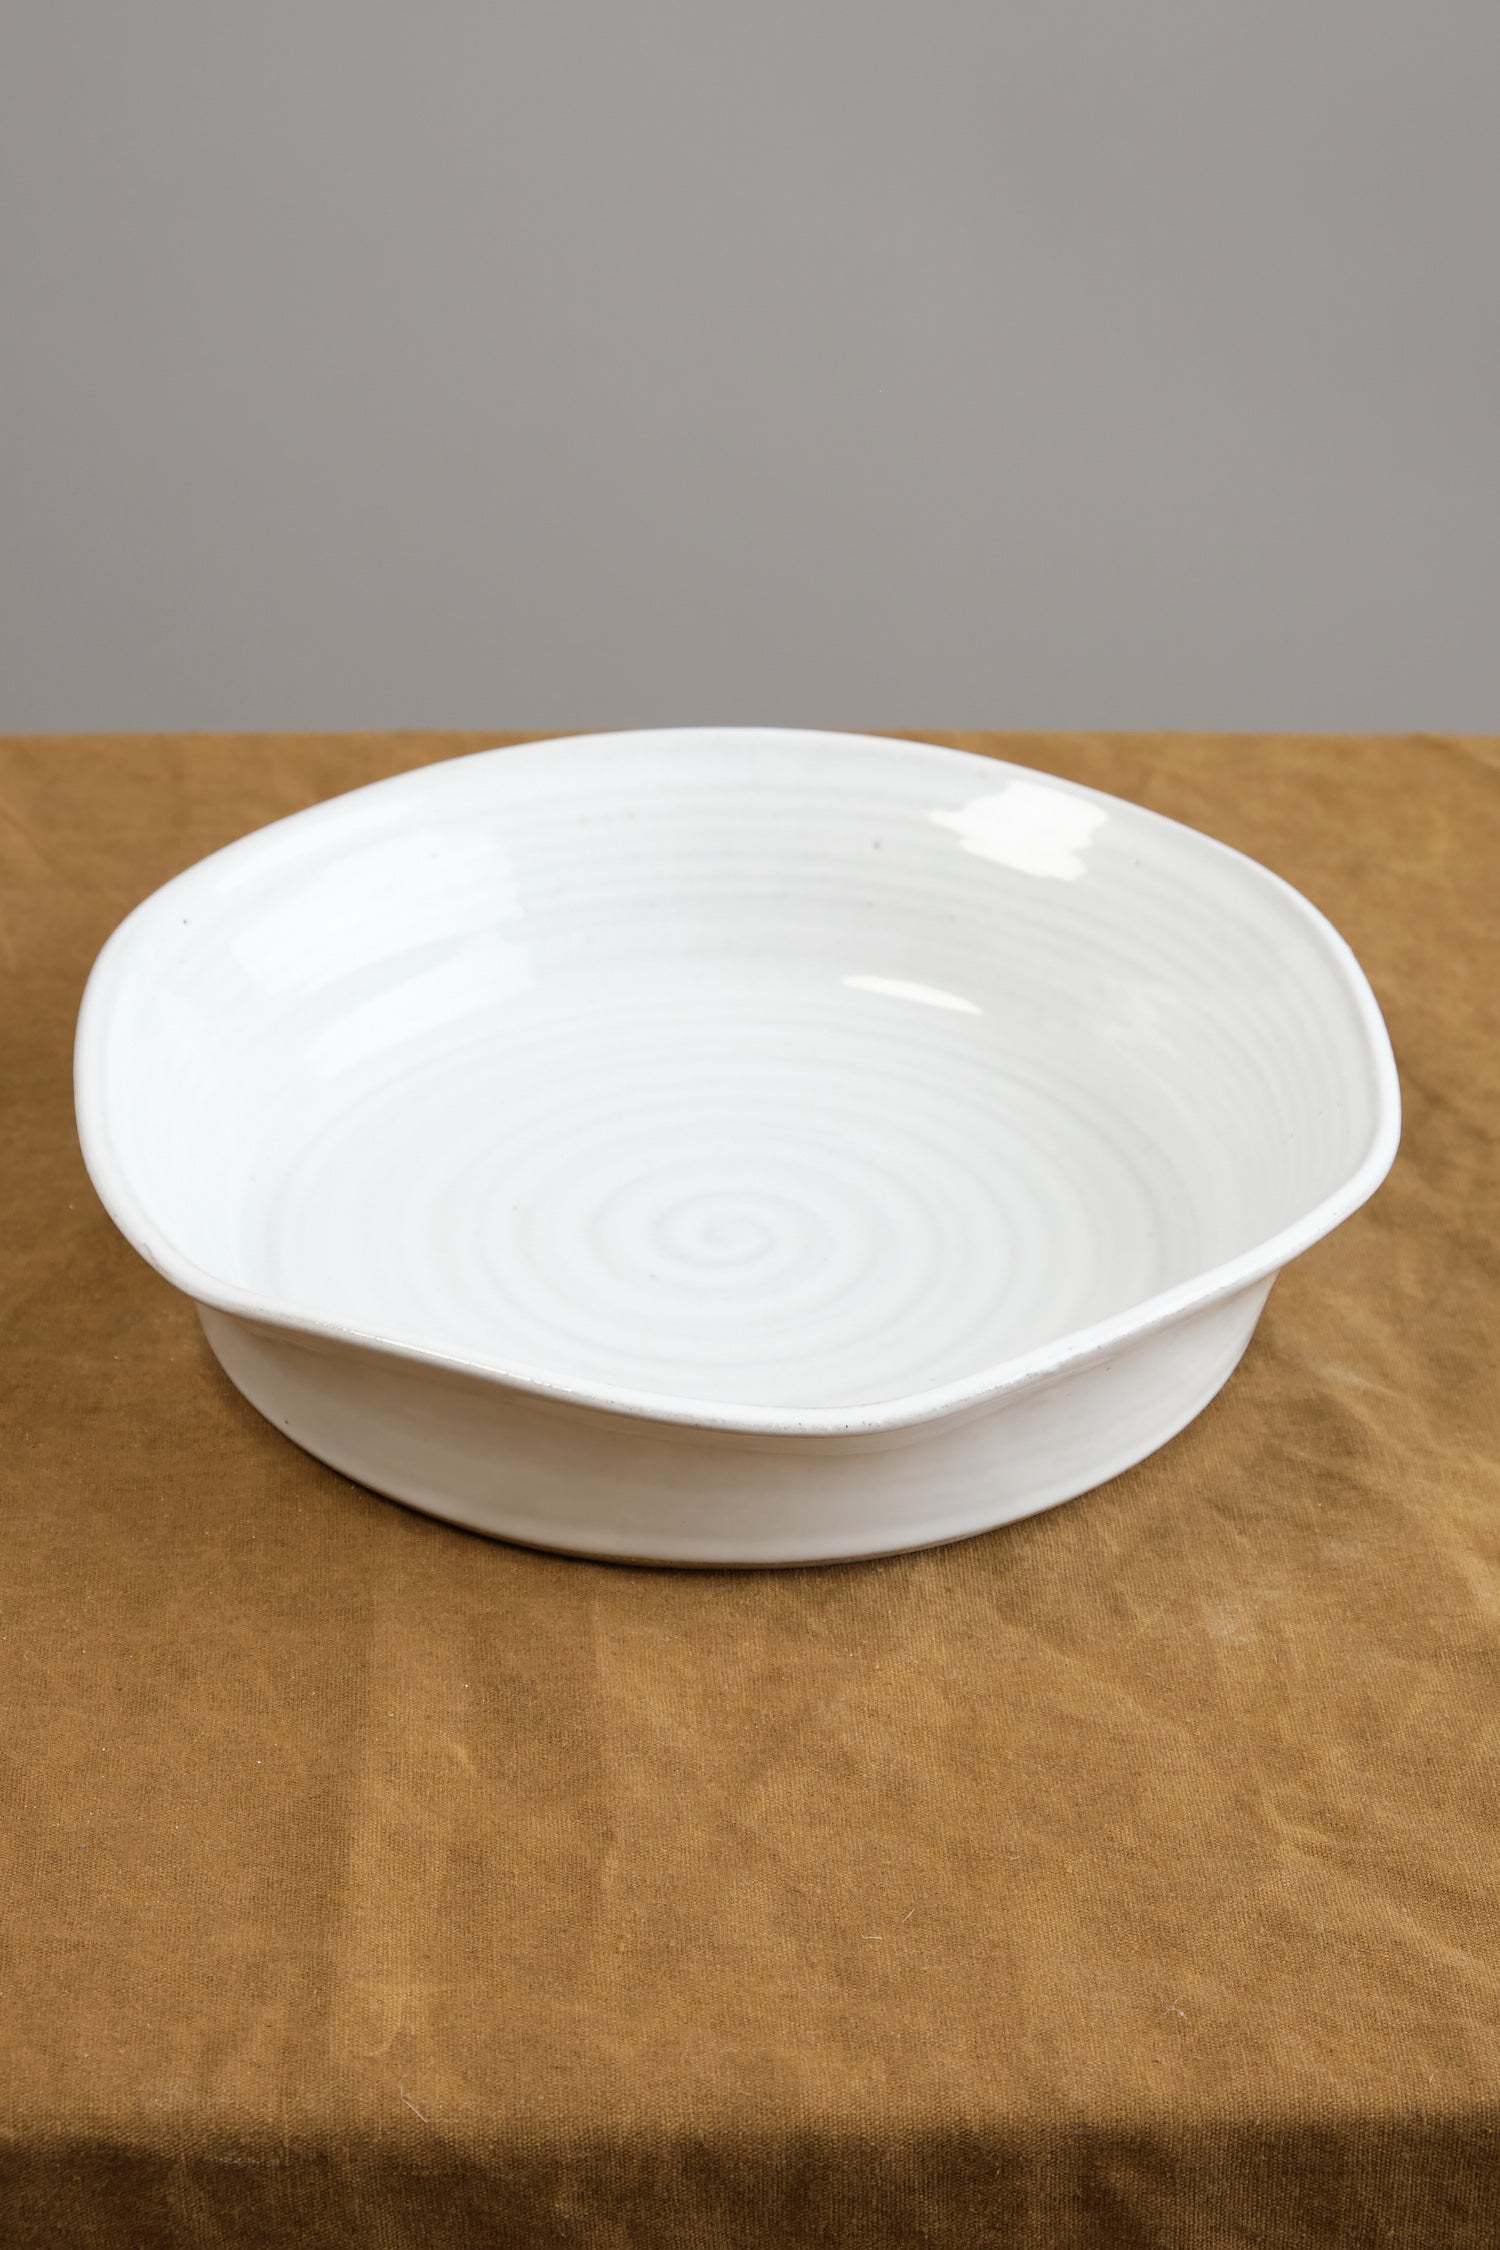 Windrow Pie Dish on table